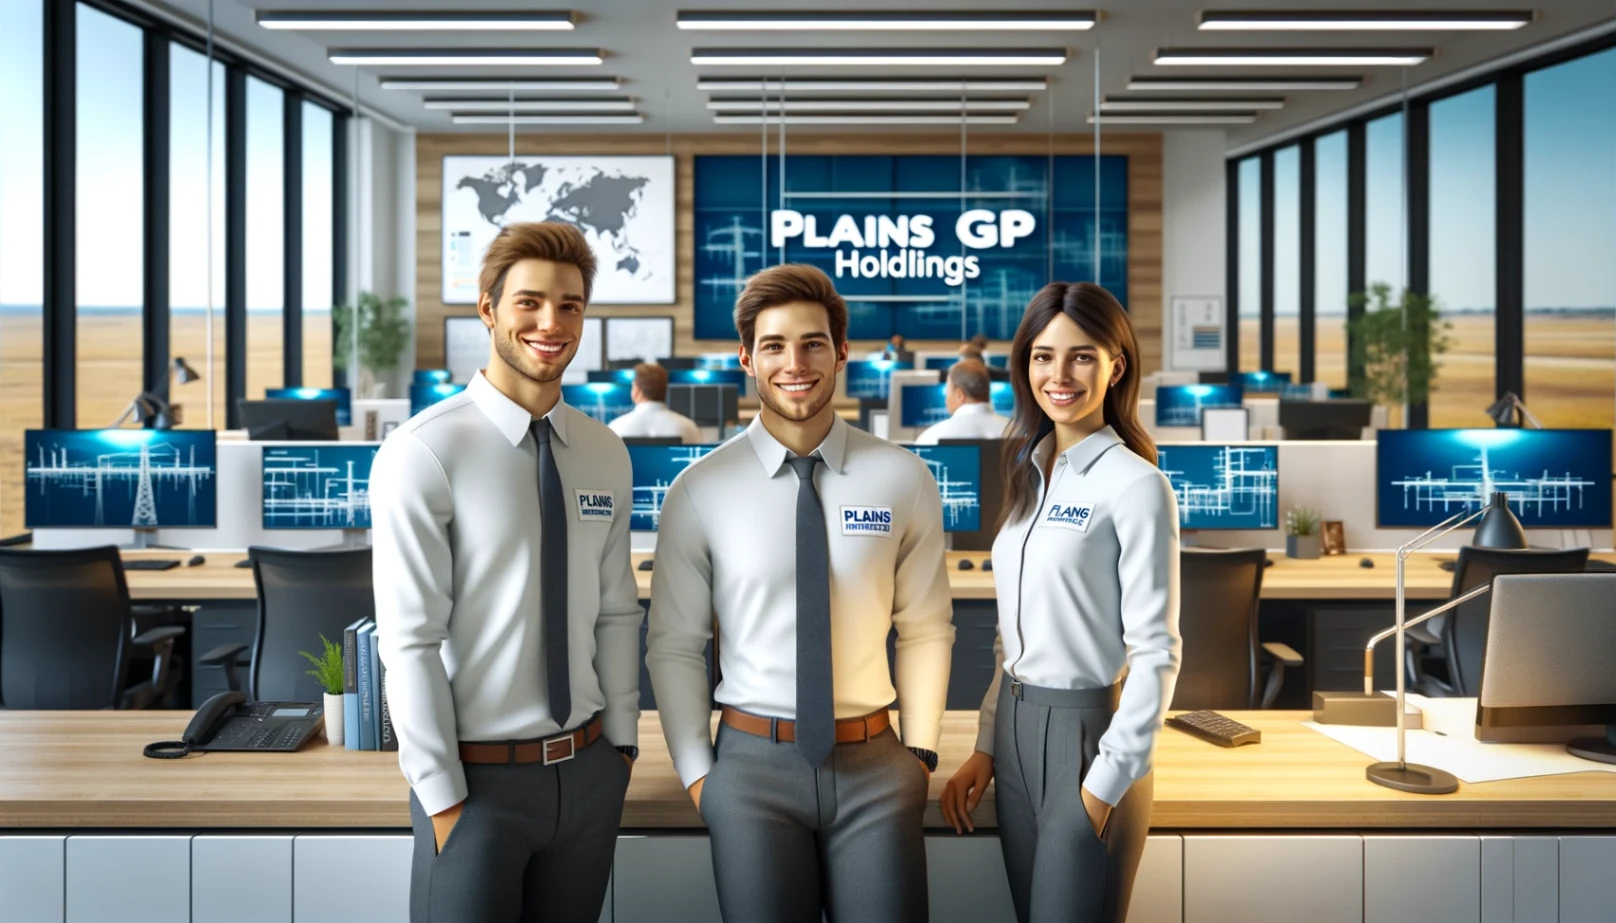 Plains GP Holdings: How to Start a Career